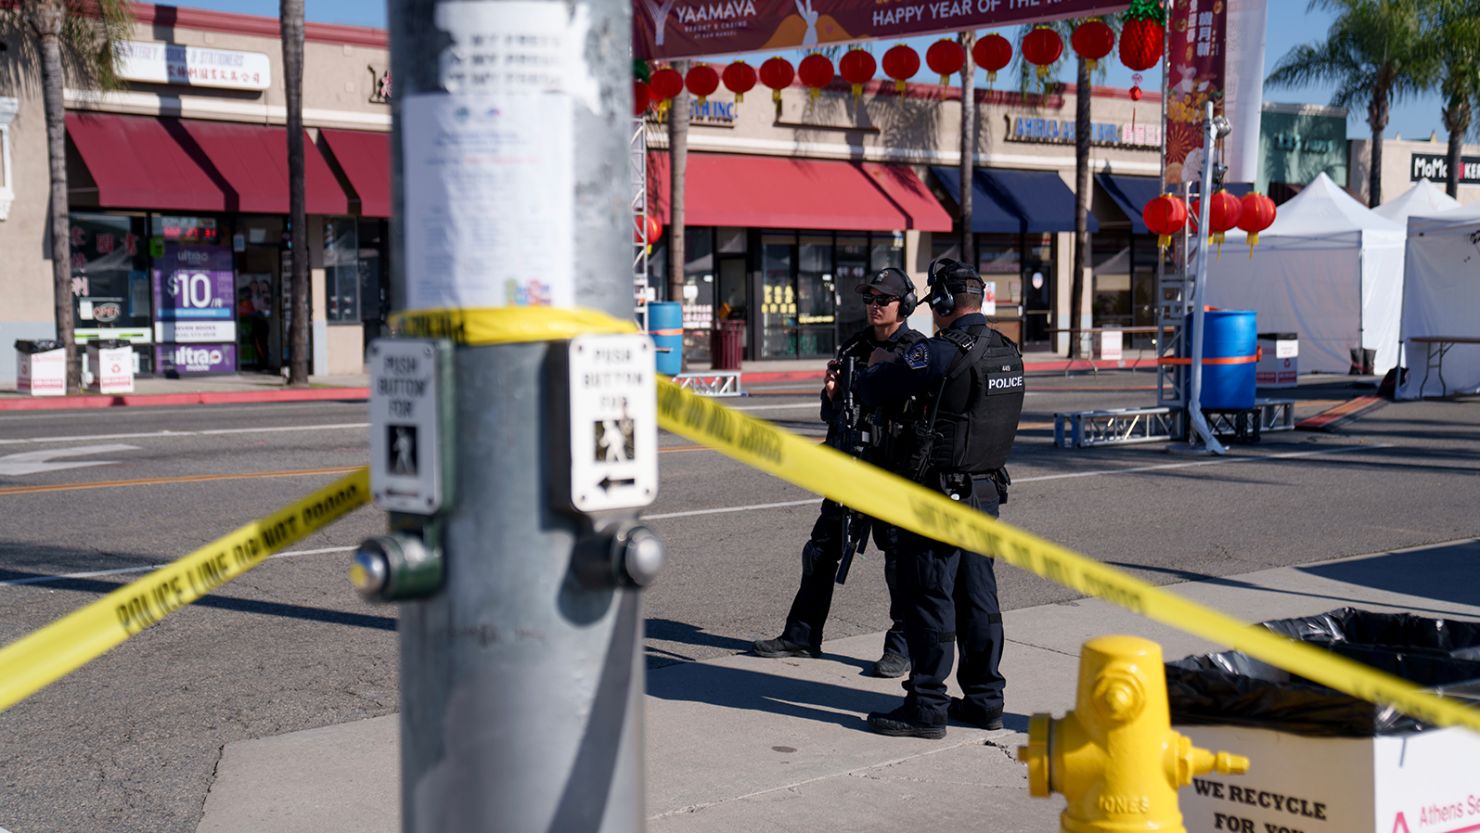 Police officers stand guard near the scene of a deadly shooting on January 22, 2023 in Monterey Park, California. 